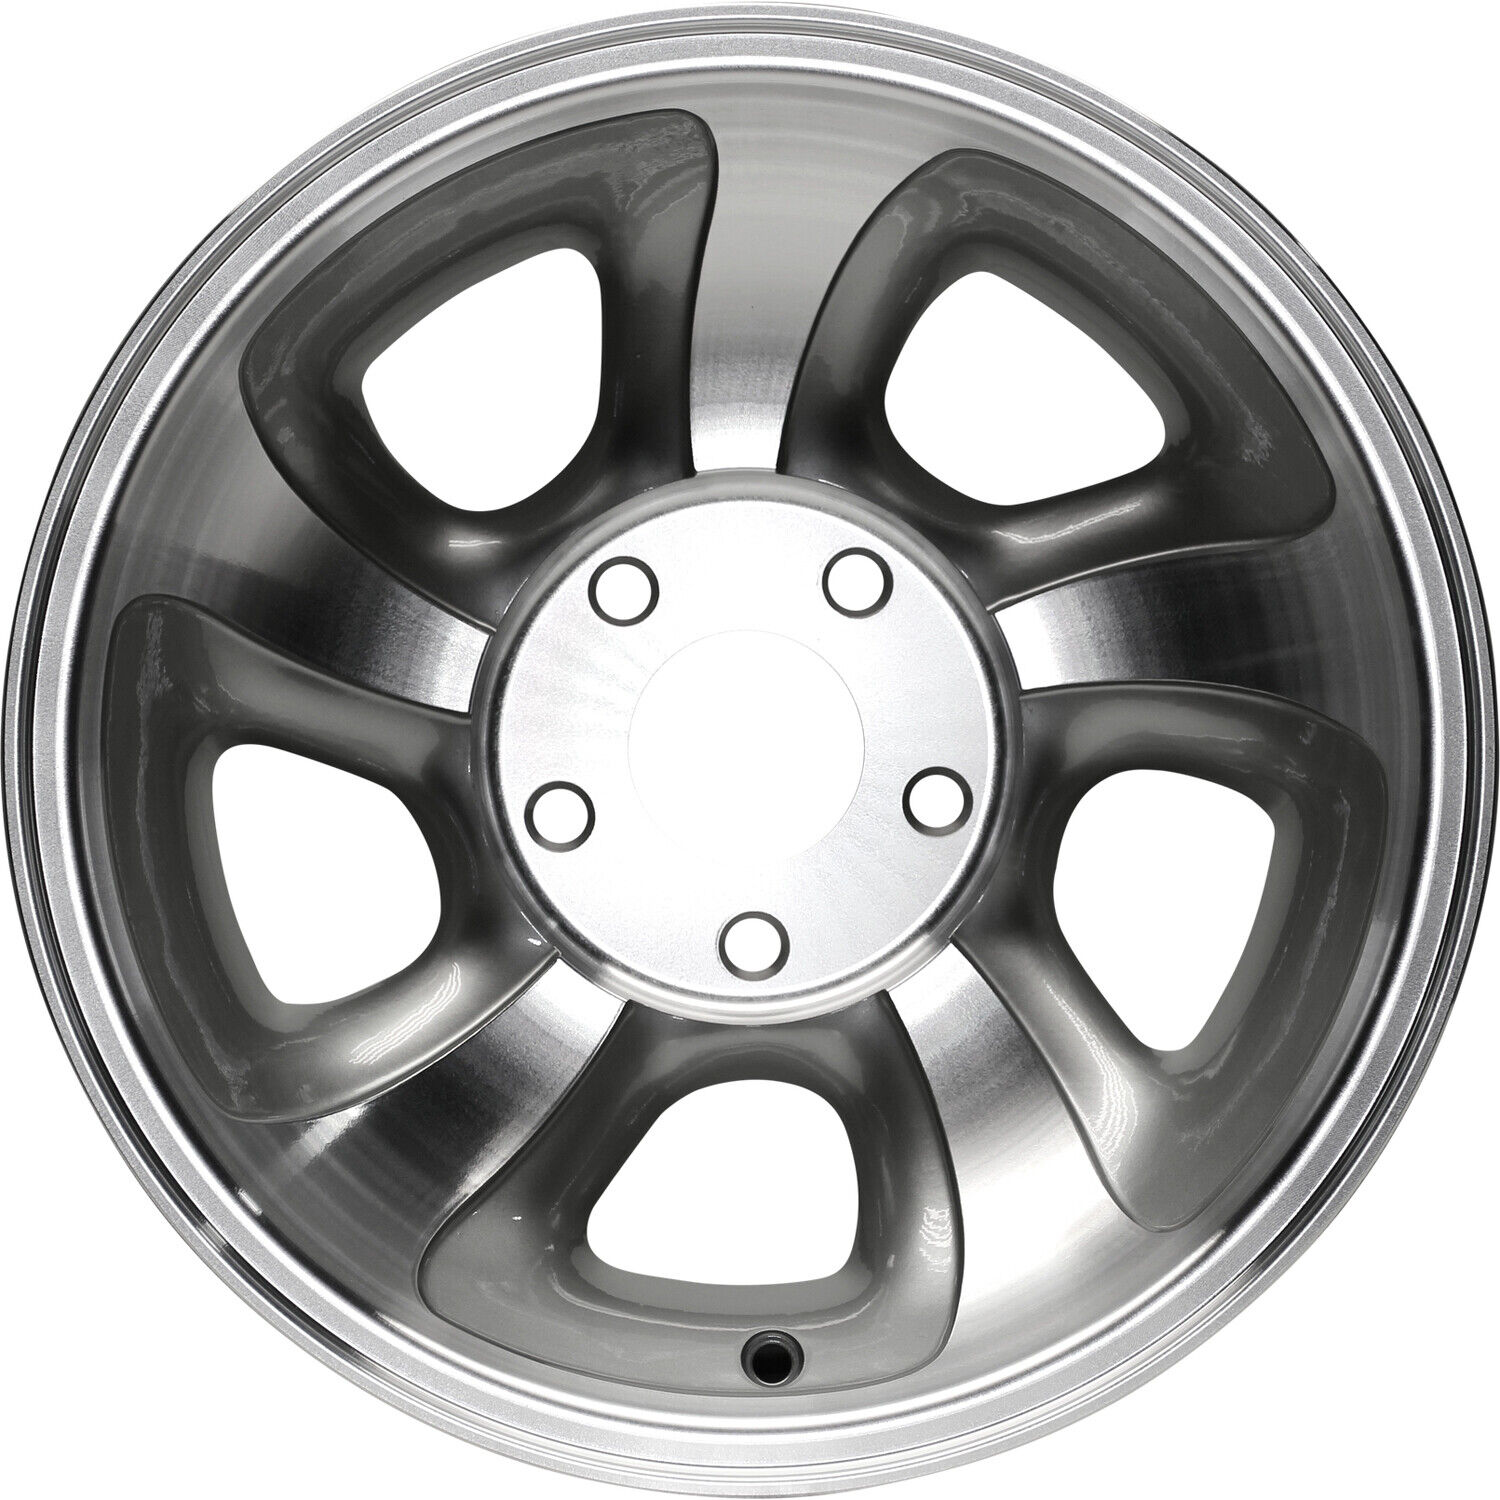 05063 Reconditioned OEM Aluminum Wheel 15x7 fits 1998-2003 Chevrolet S10 Pickup